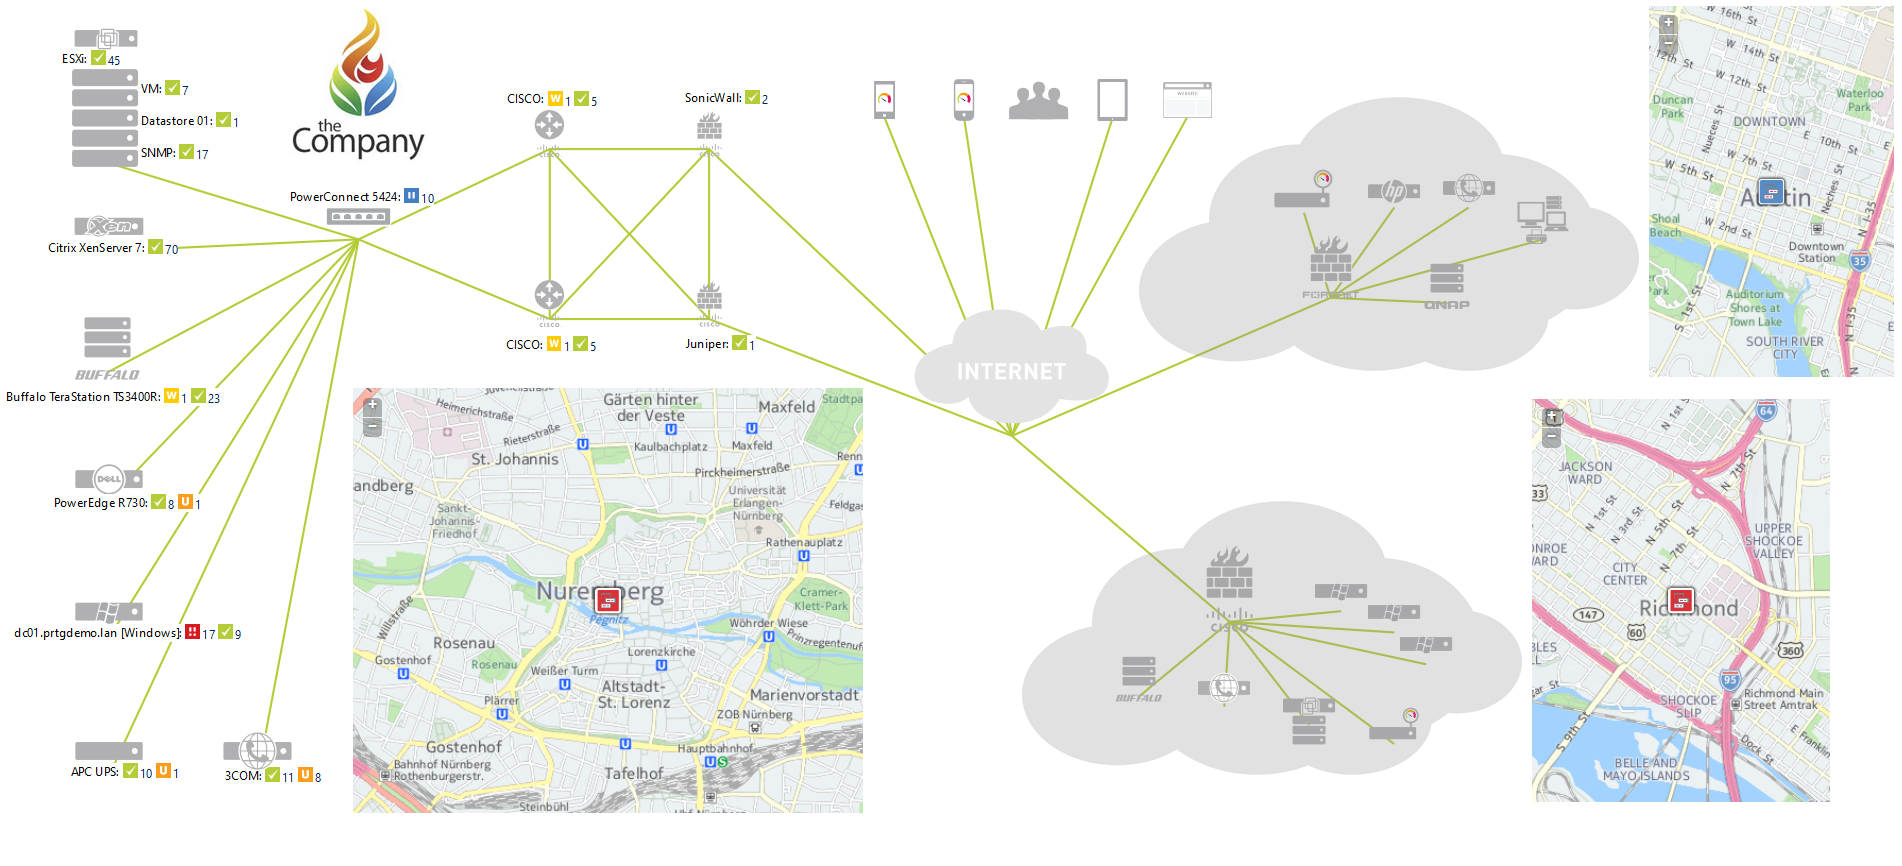 Know exactly what's happening at your remote sites with a branch office network map